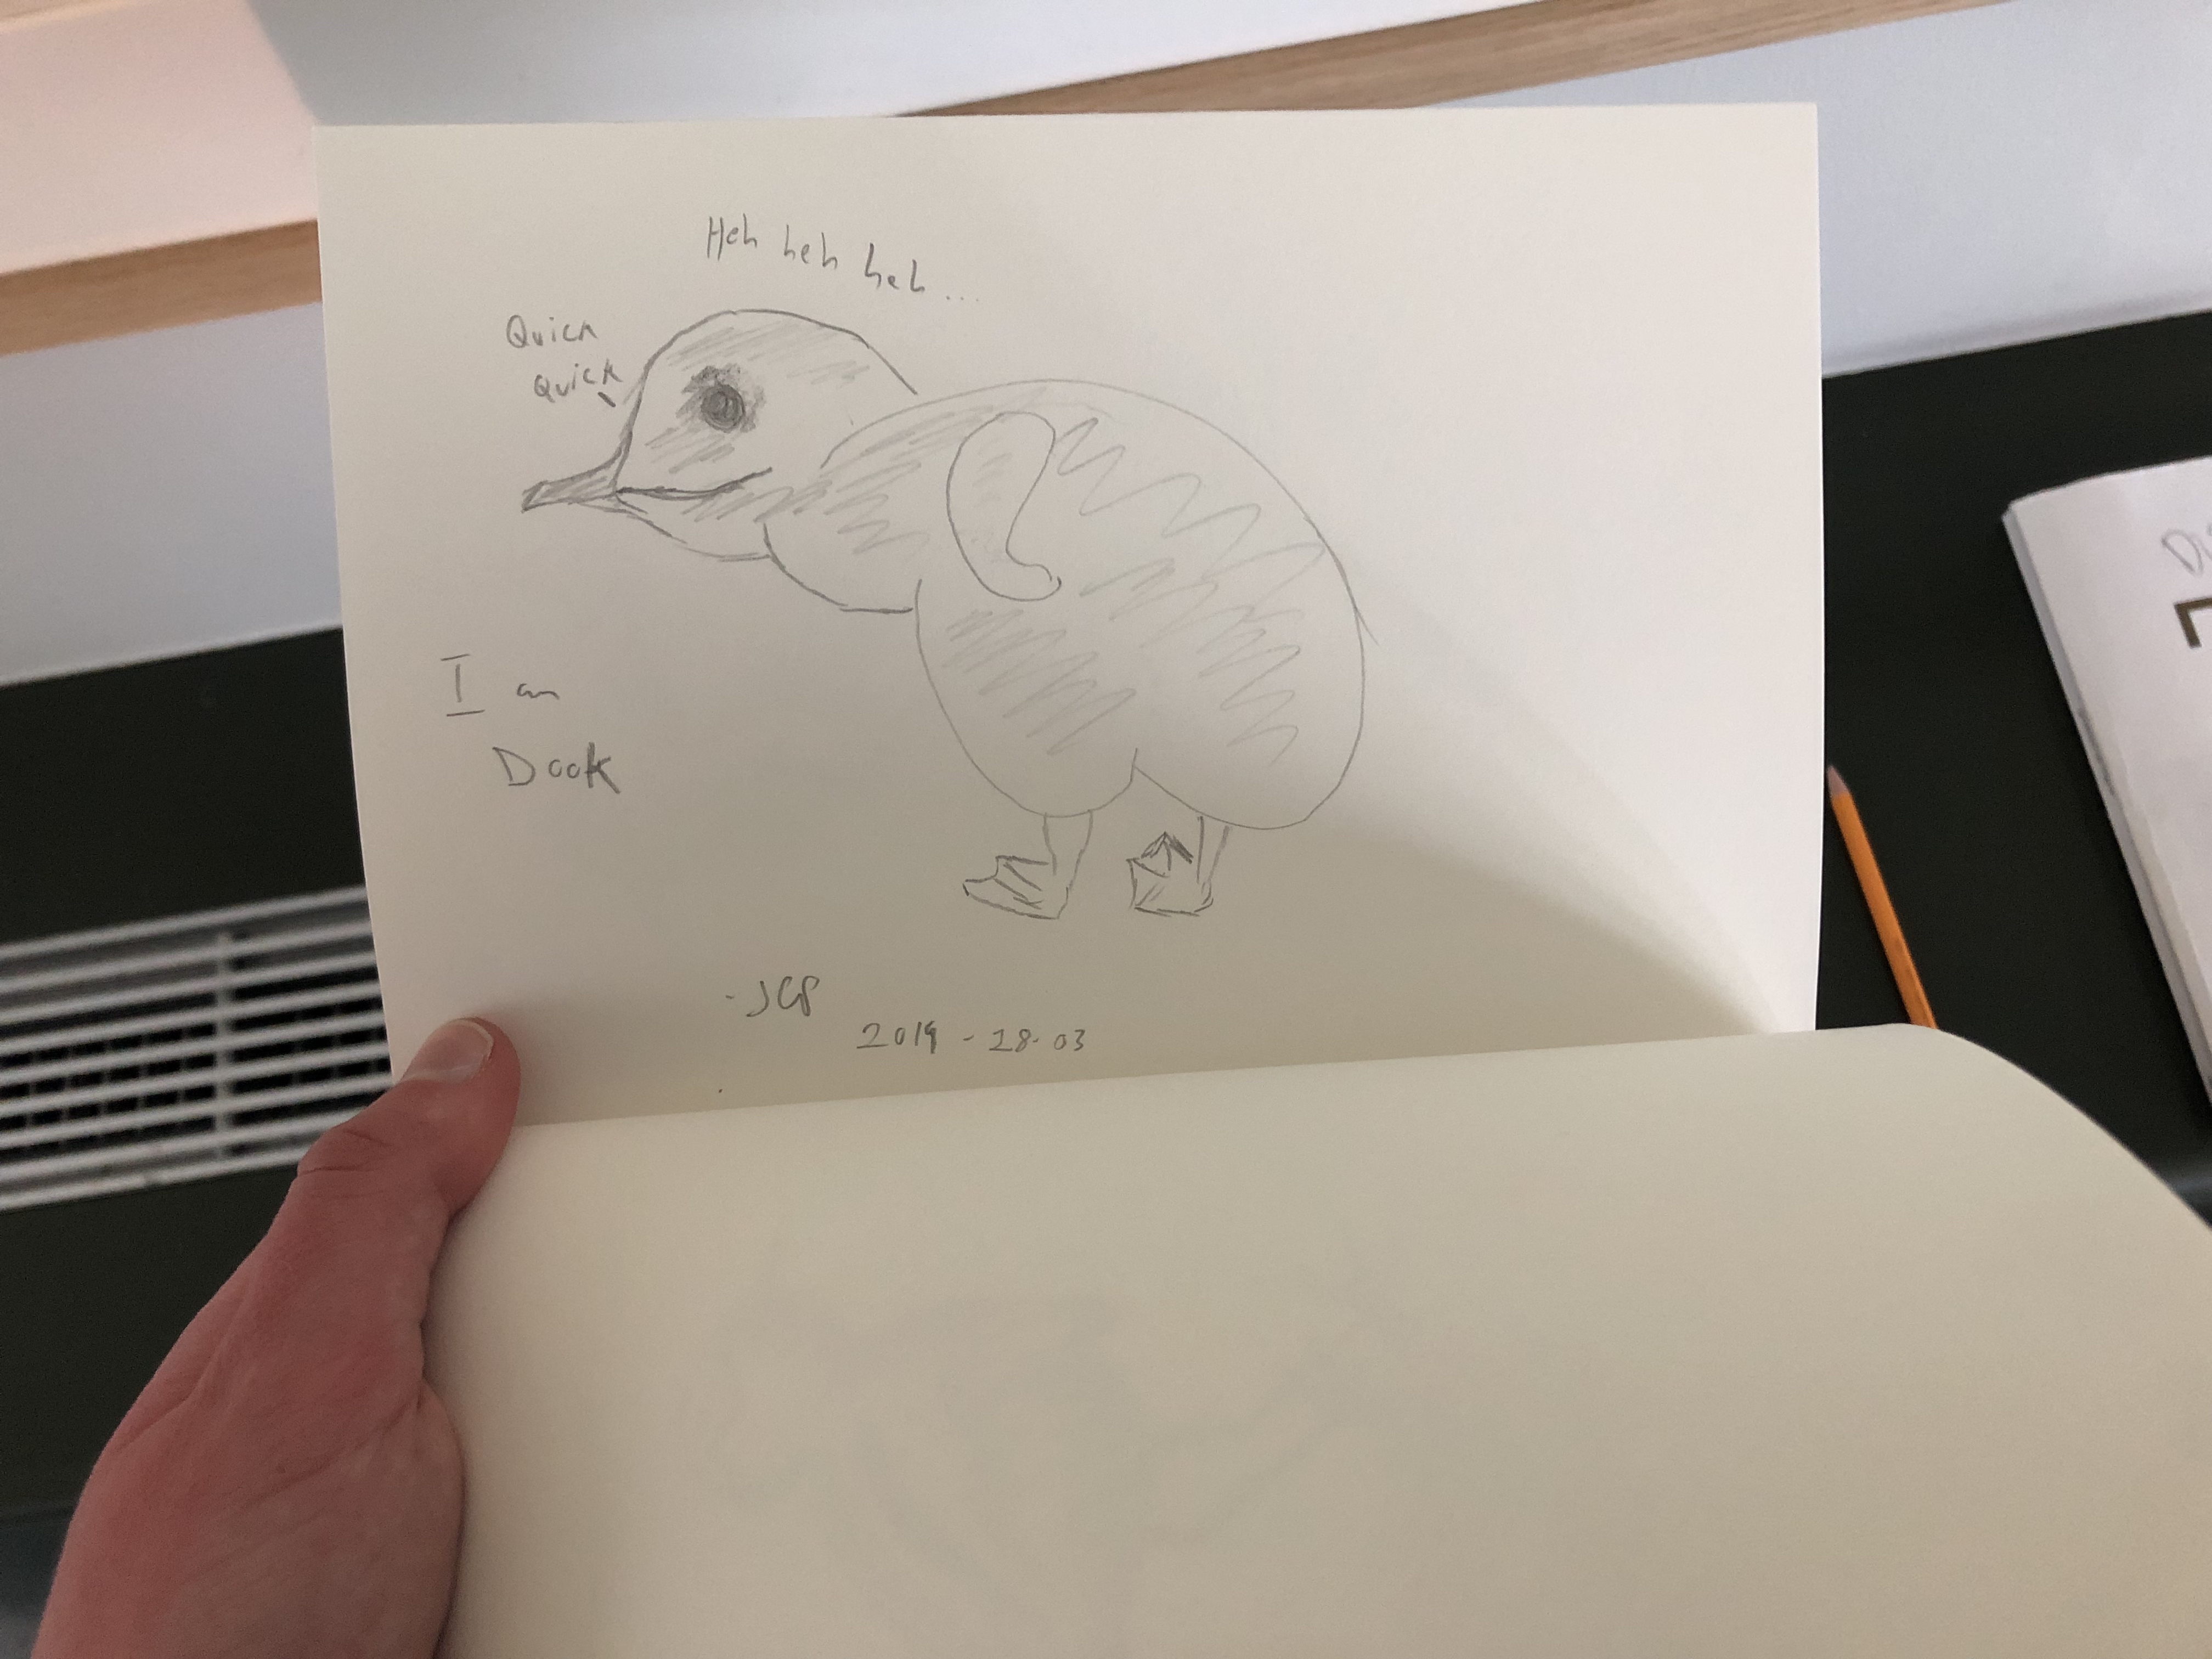 Drawing of a duck found in the Icelandic Culture House. The duck says I am Dook